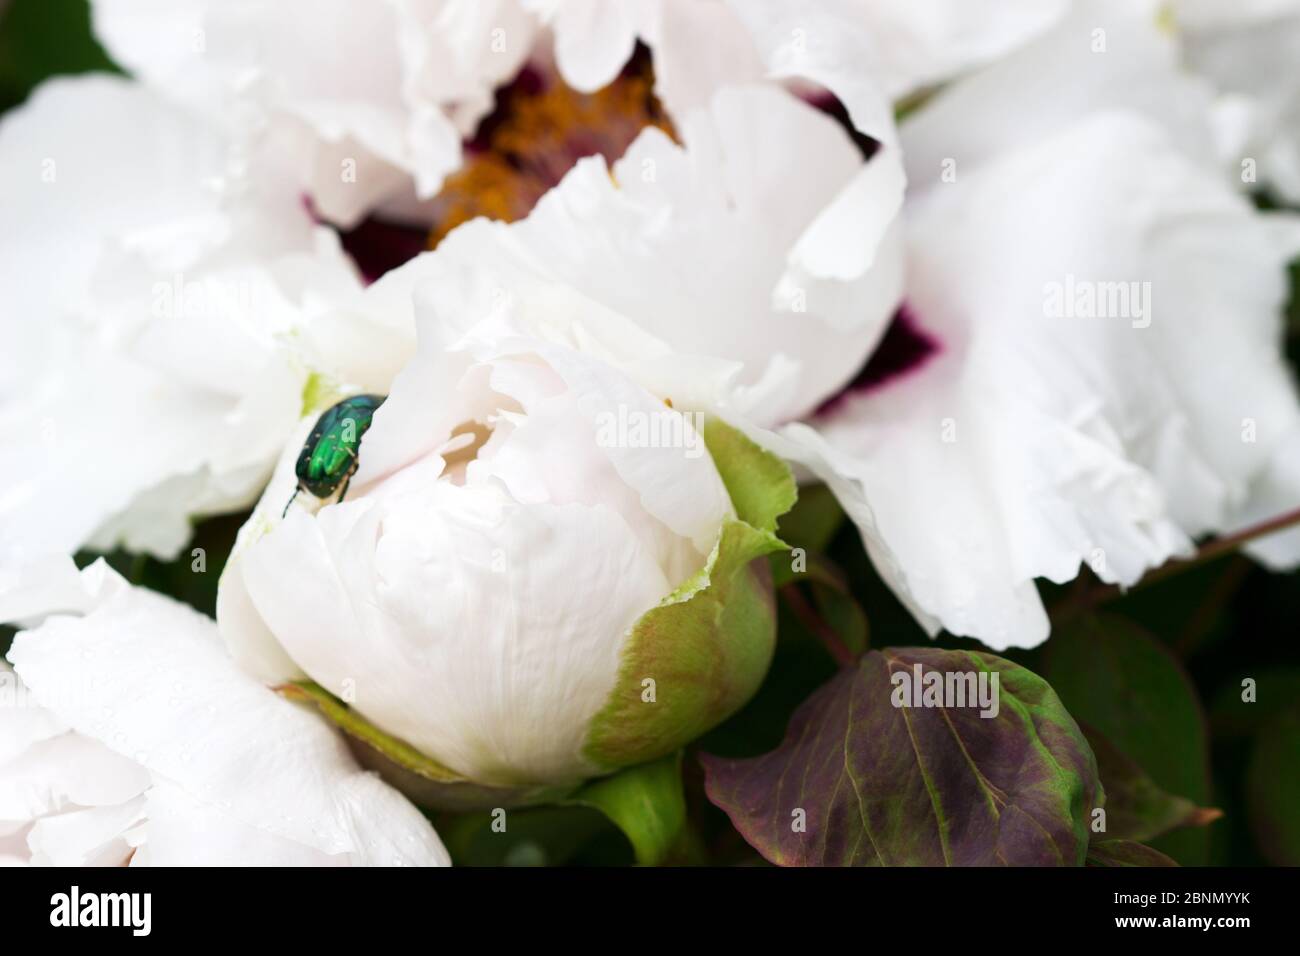 White flowers of tree peony and beetle in a city park. Stock Photo